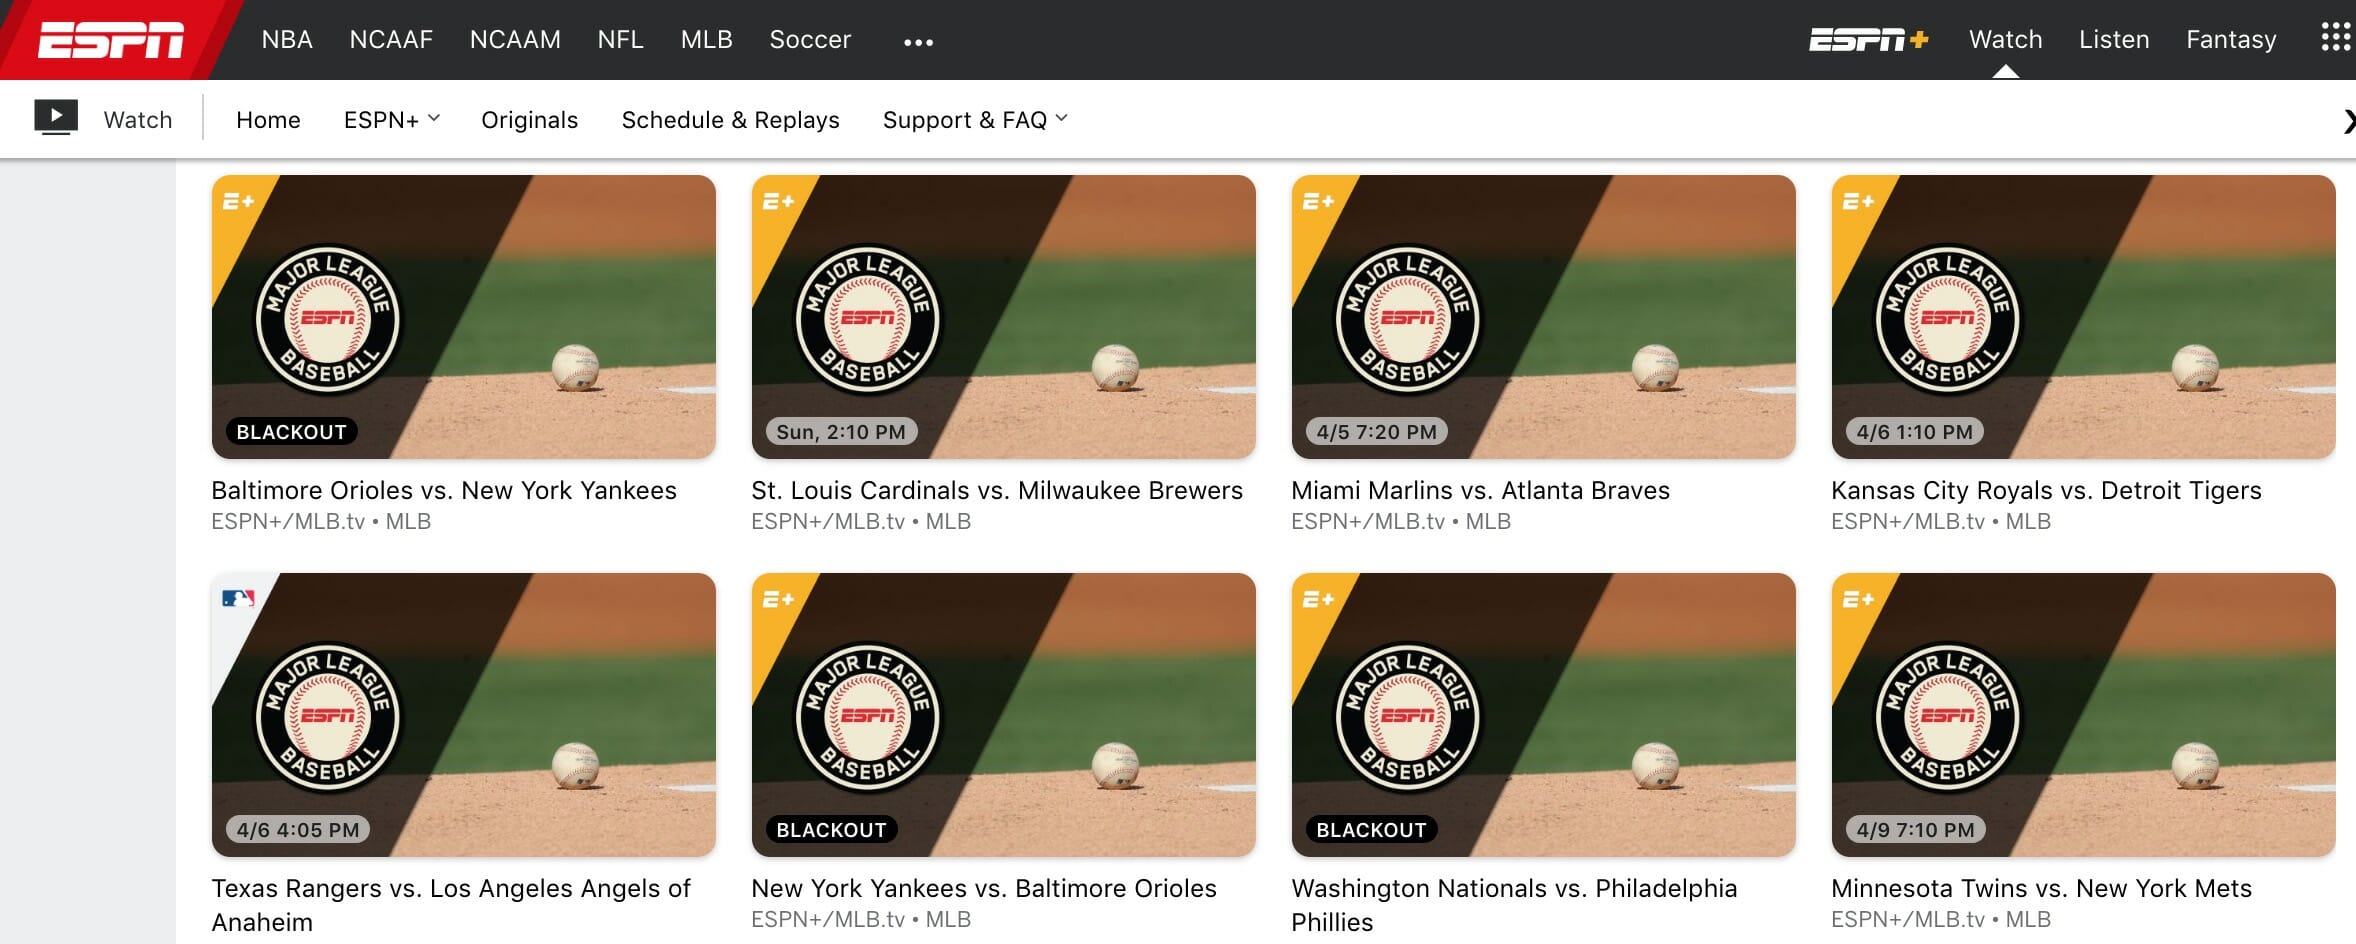 Apple TV Now Has MLBTV and NBA Live Game Streaming